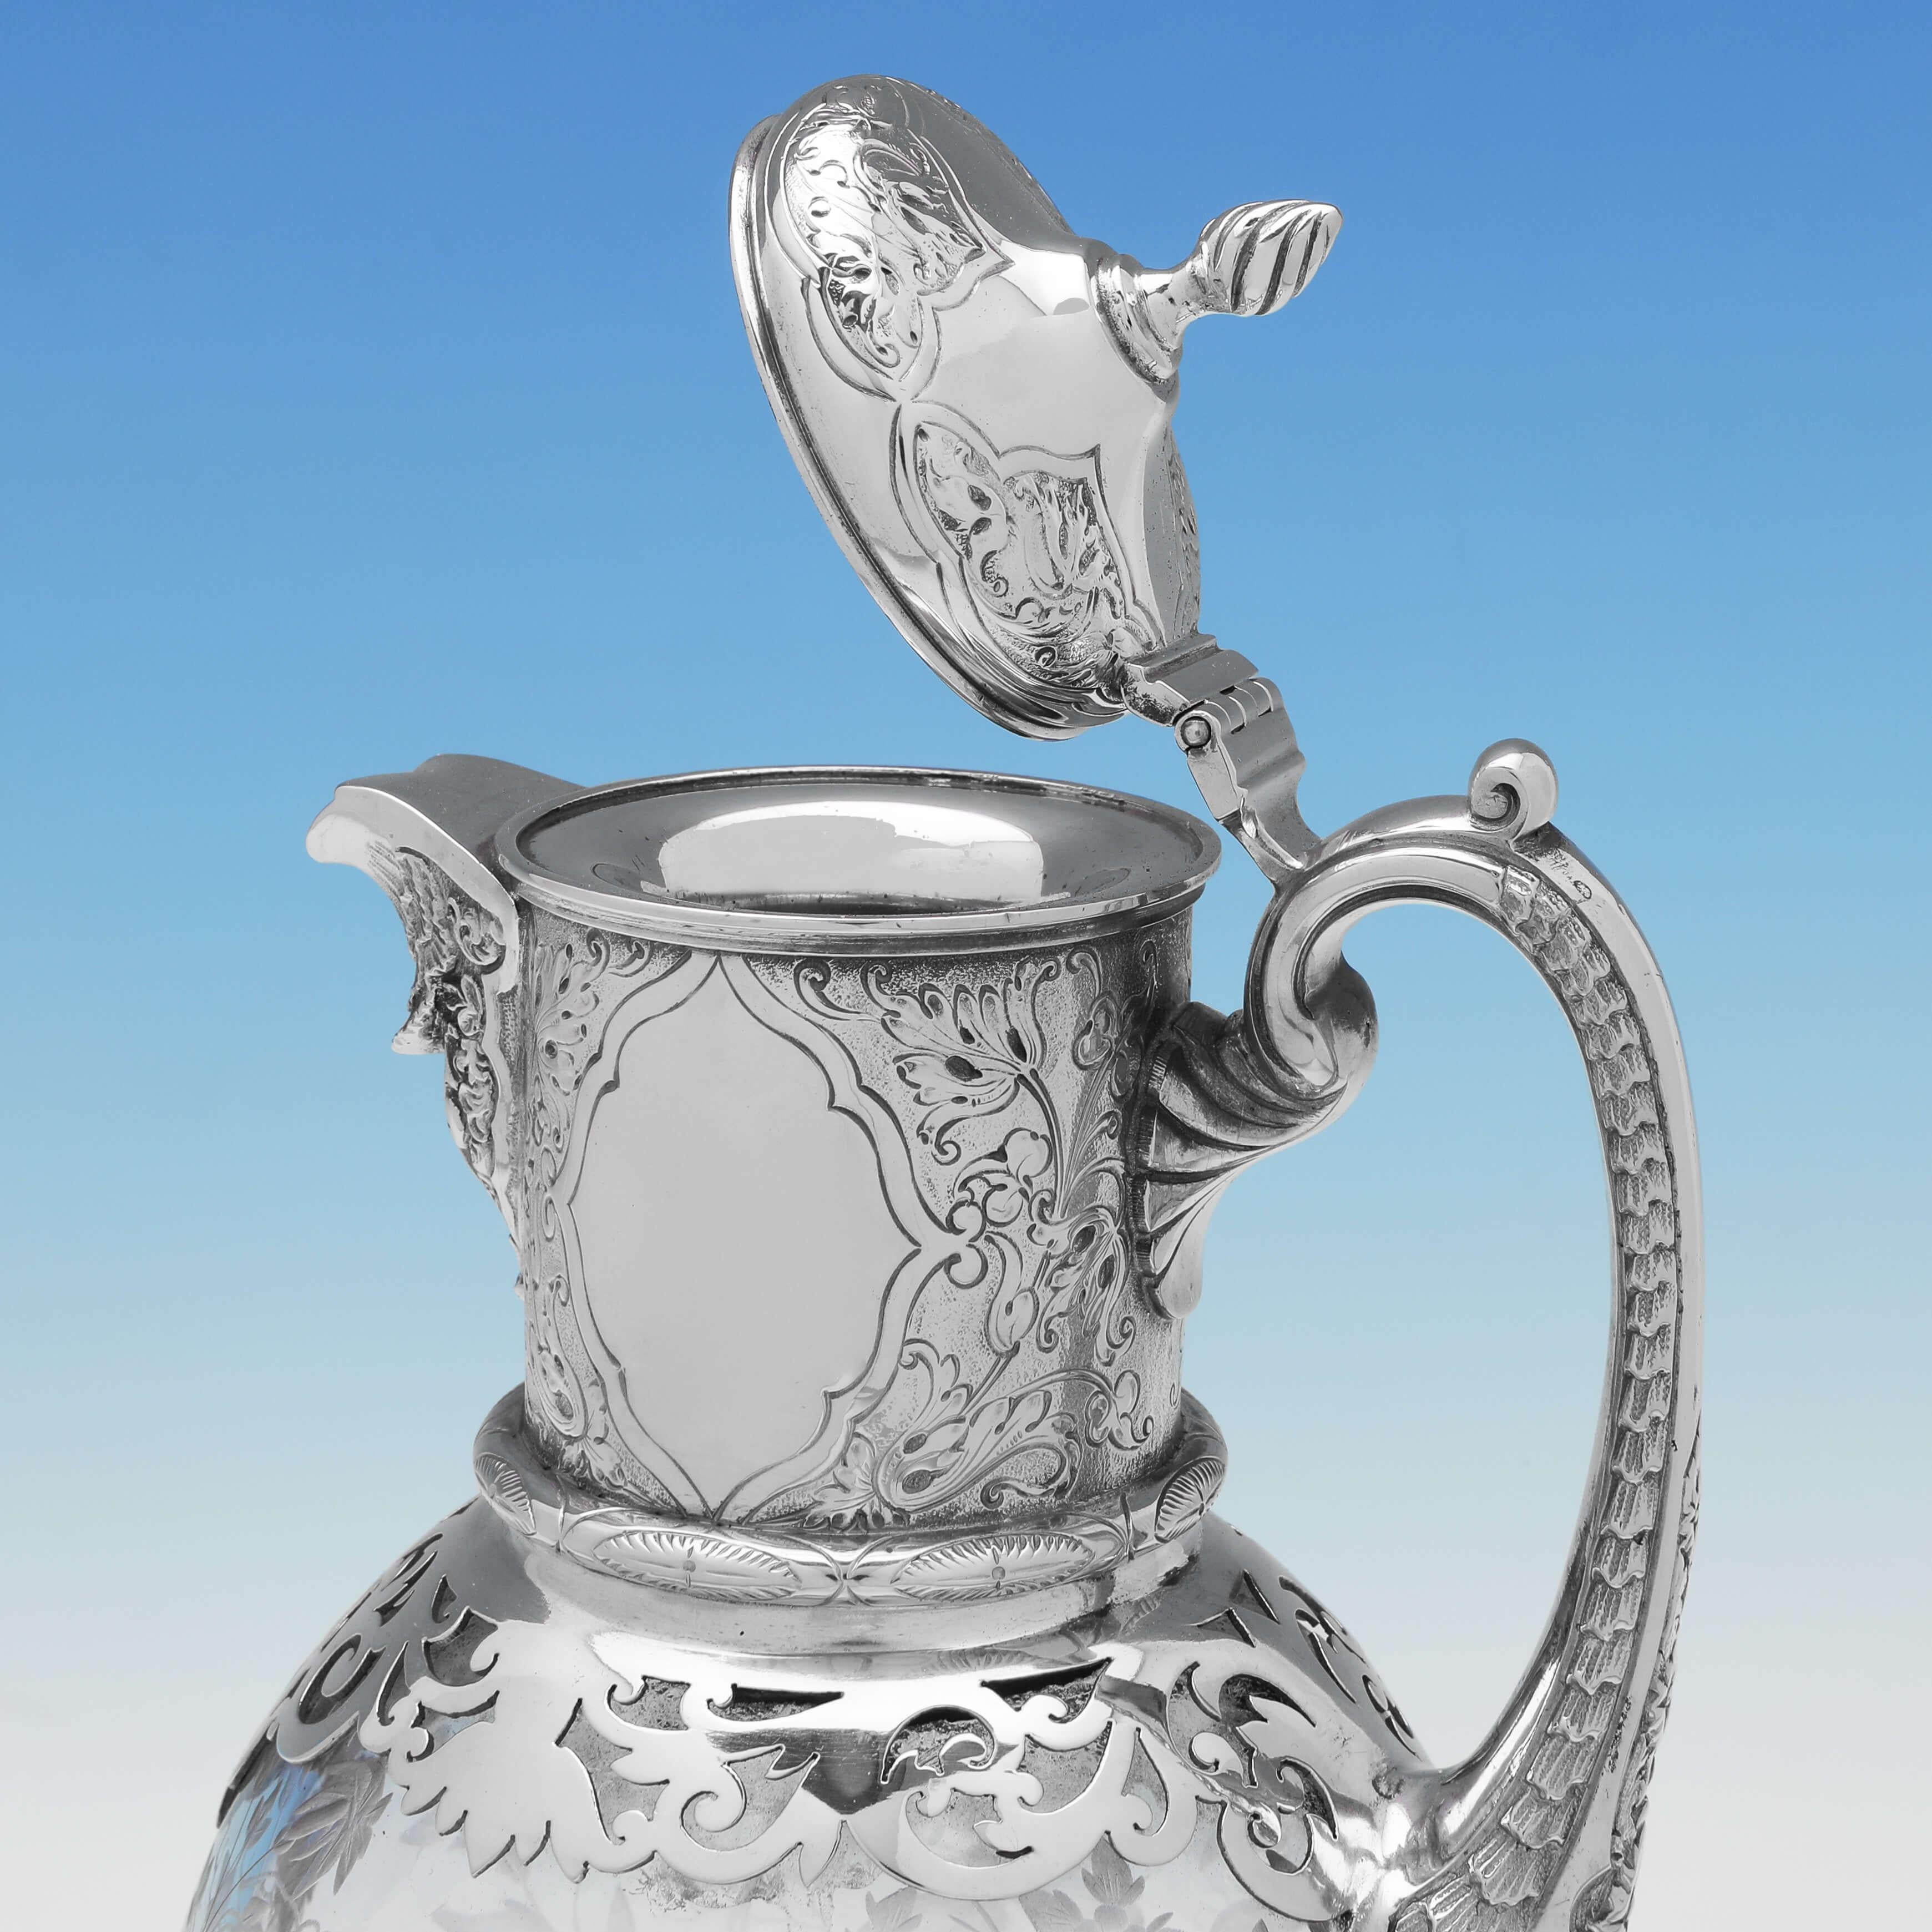 Aesthetic Movement Stunning Aesthetic Period Antique Silver Plated Claret Jug by Elkington in 1866